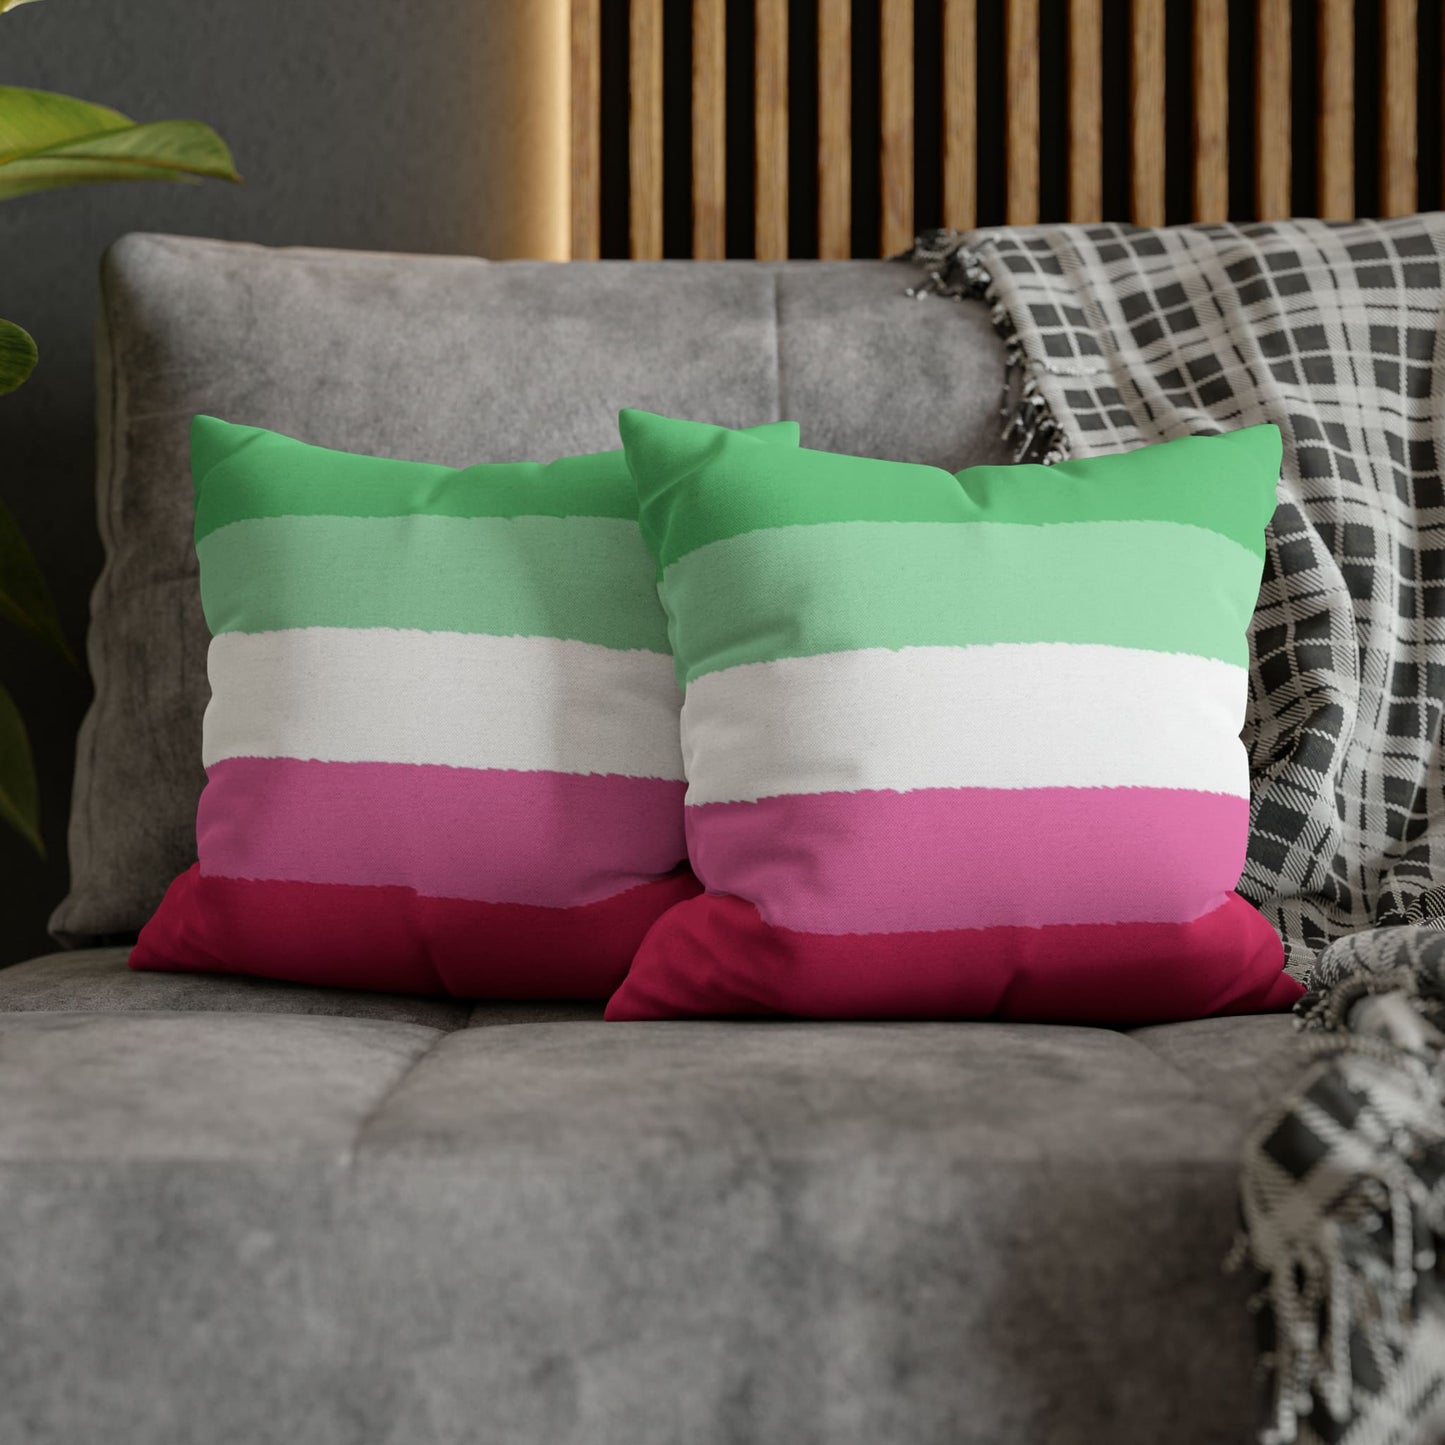 2 abrosexual pillow on couch